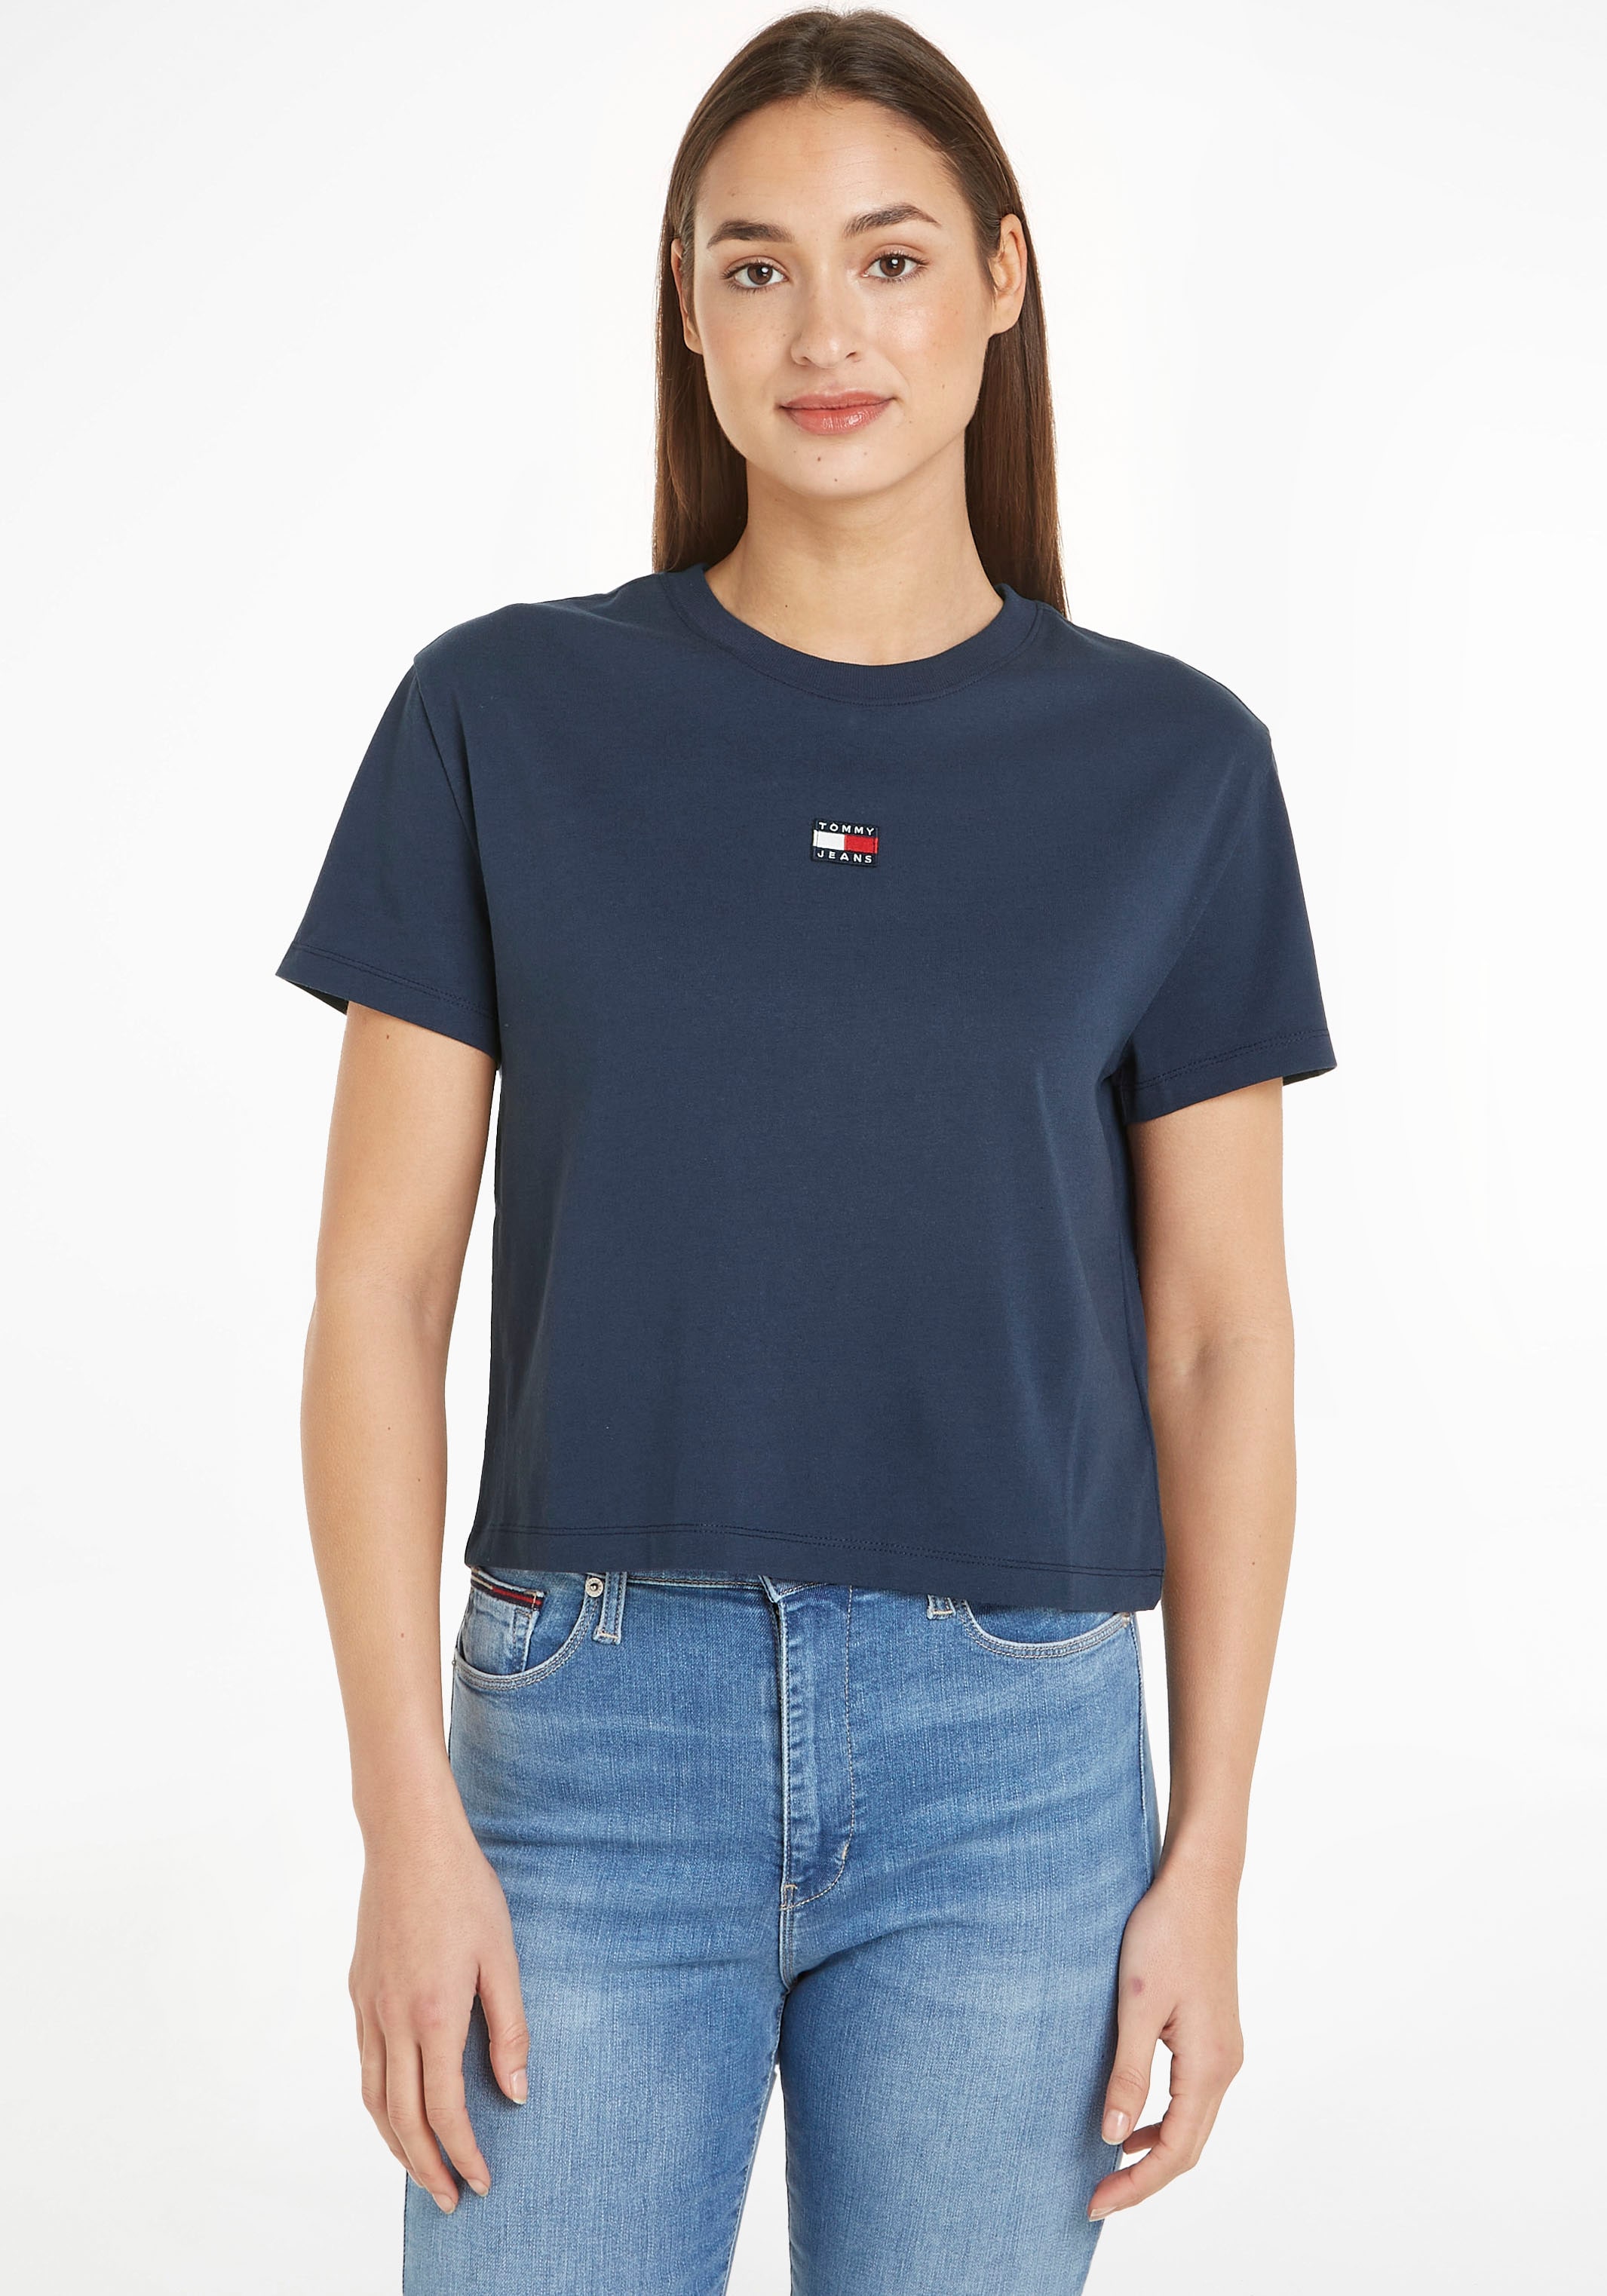 Tommy Jeans T-Shirt »TJW CLS Brustkorb mit am Jeans BADGE bei Tommy TEE«, ♕ XS Logostickerei